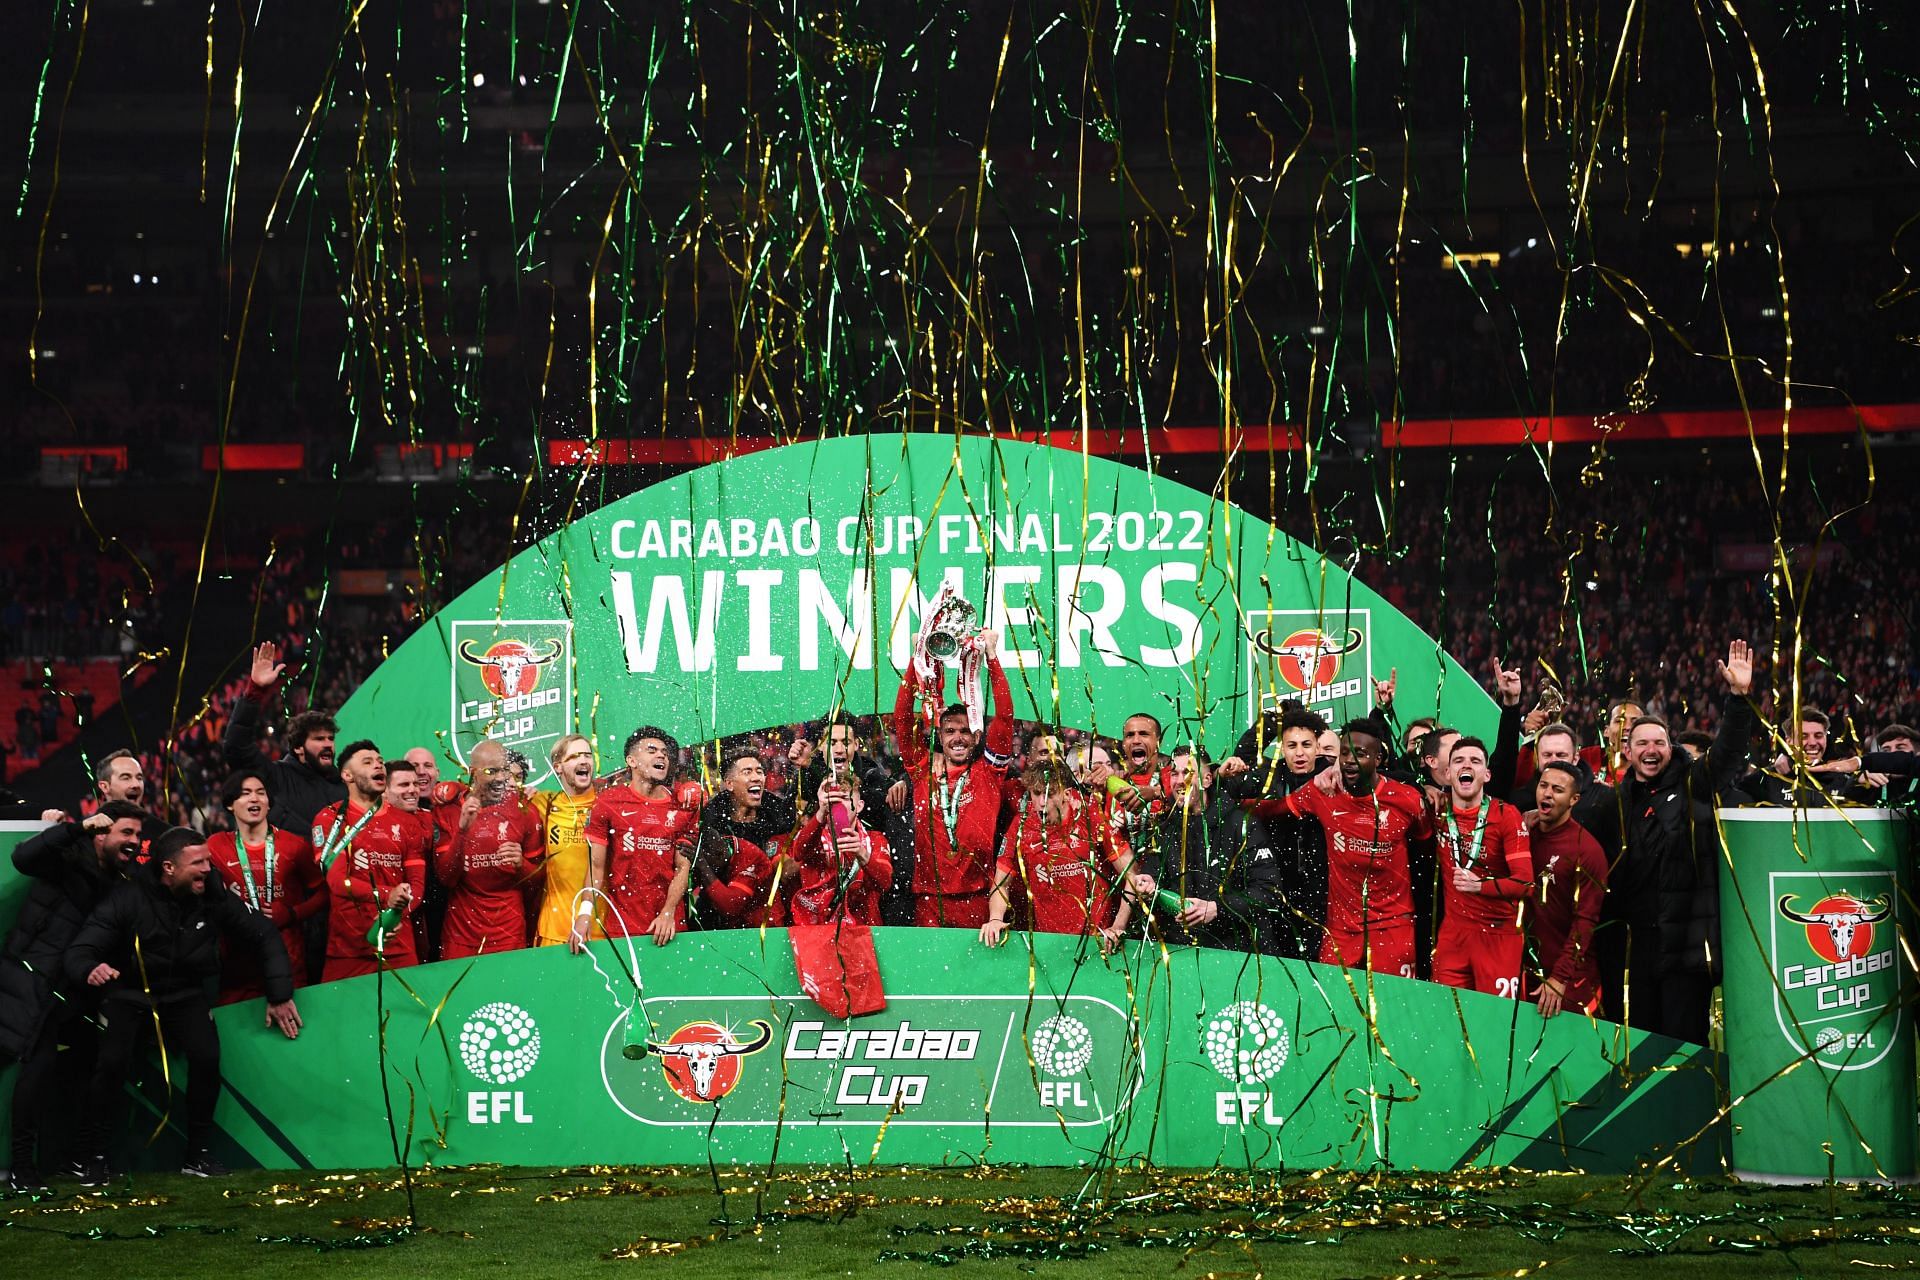 The Anfield side are the 2021-22 Carabao Cup champions.